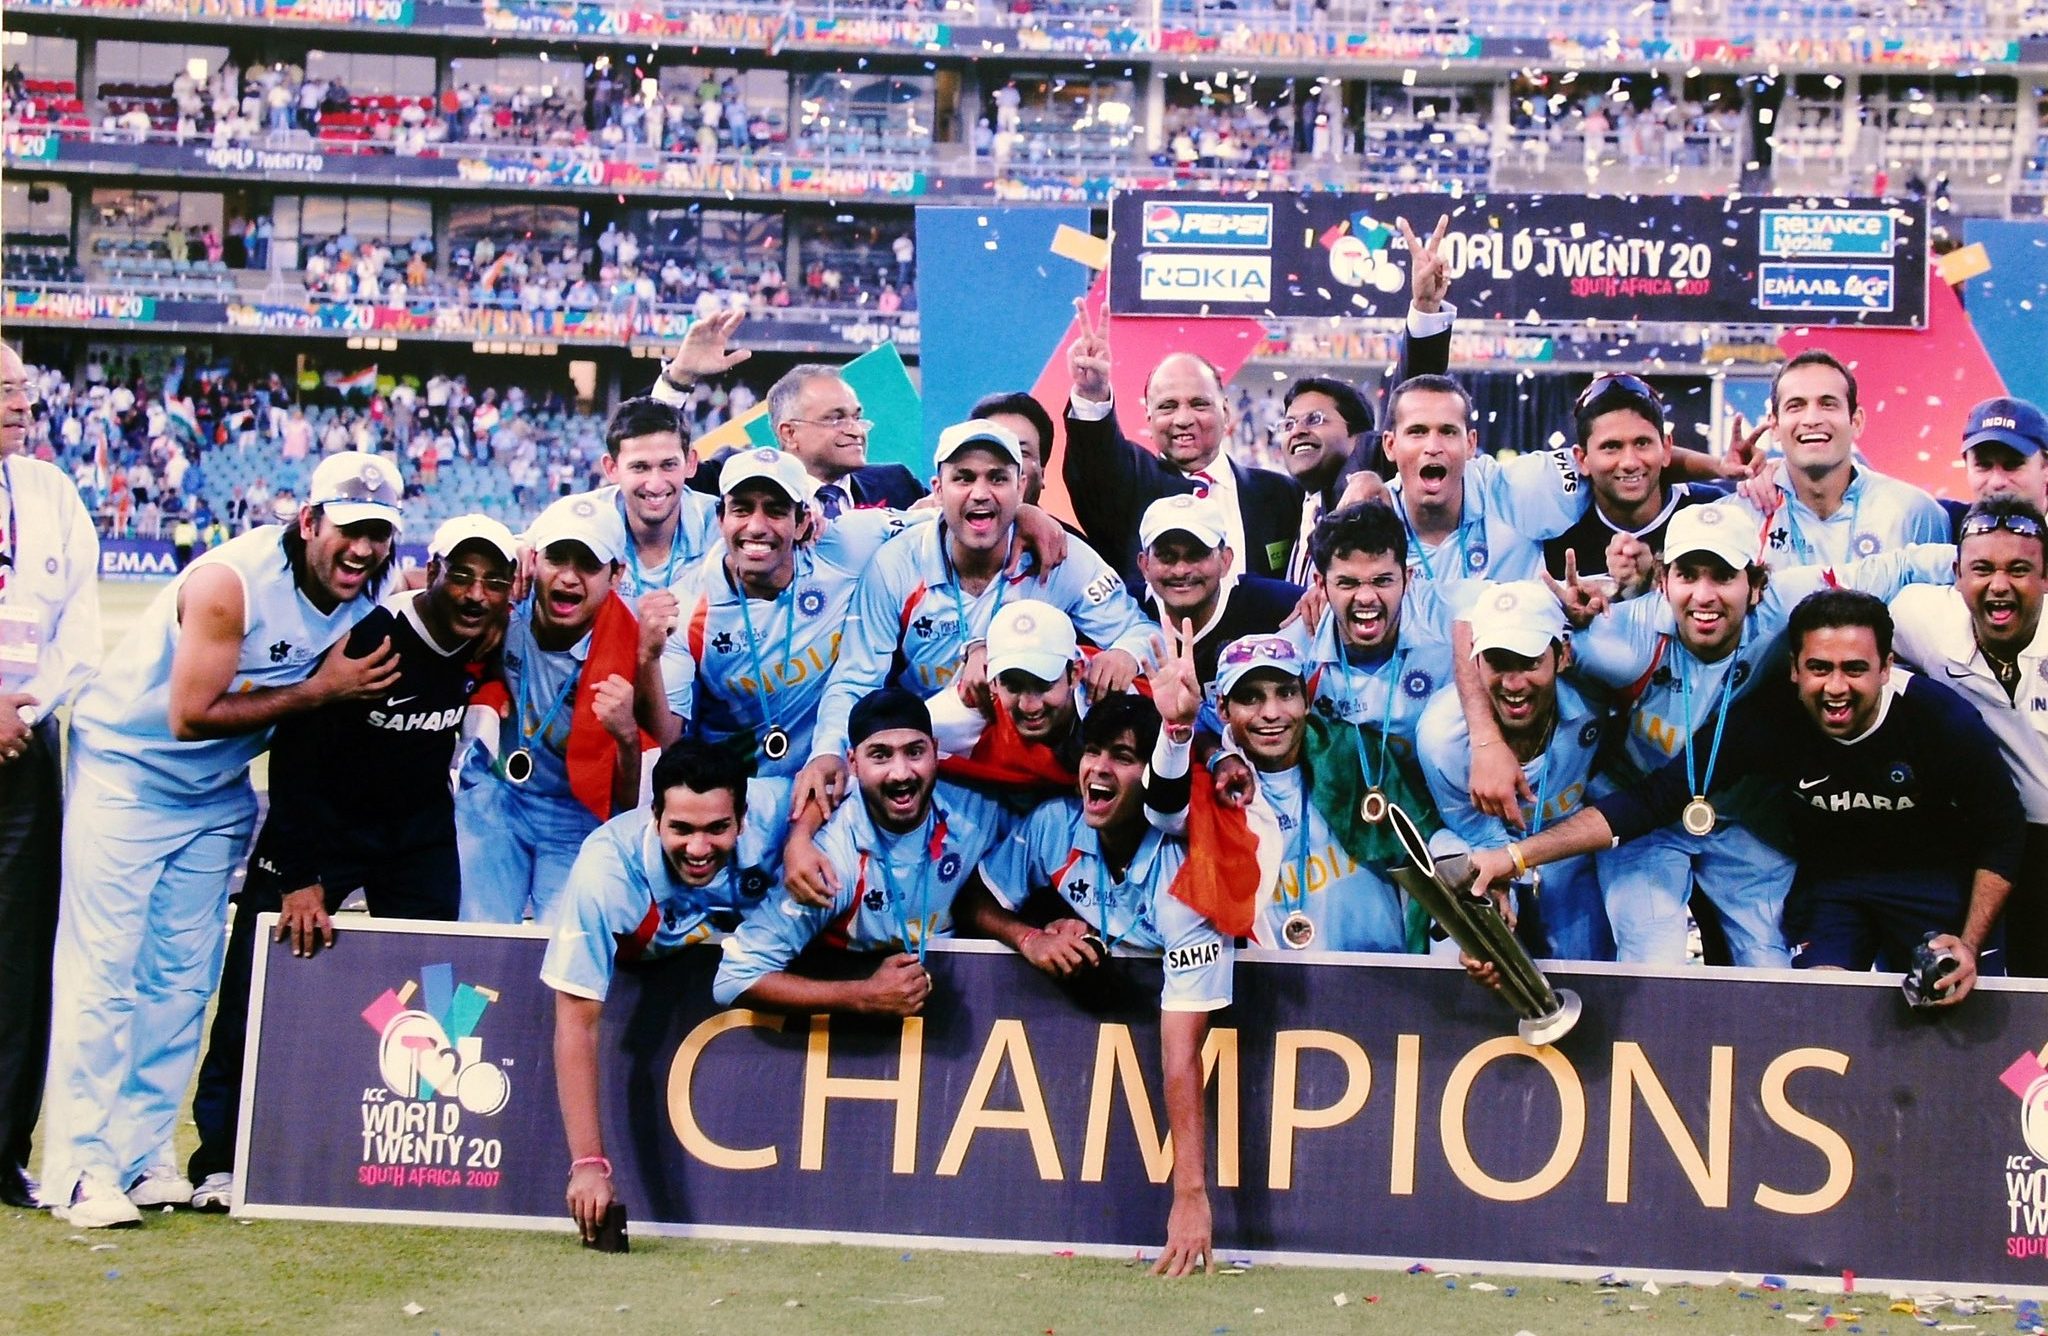 2007 T20 WC Web Series: WEB Series on 'untold story' of MS Dhoni-led 2007 T20 World Cup winning Team India set for release in 2023 - CHECK Details, MS Dhoni 2007 T20 WC